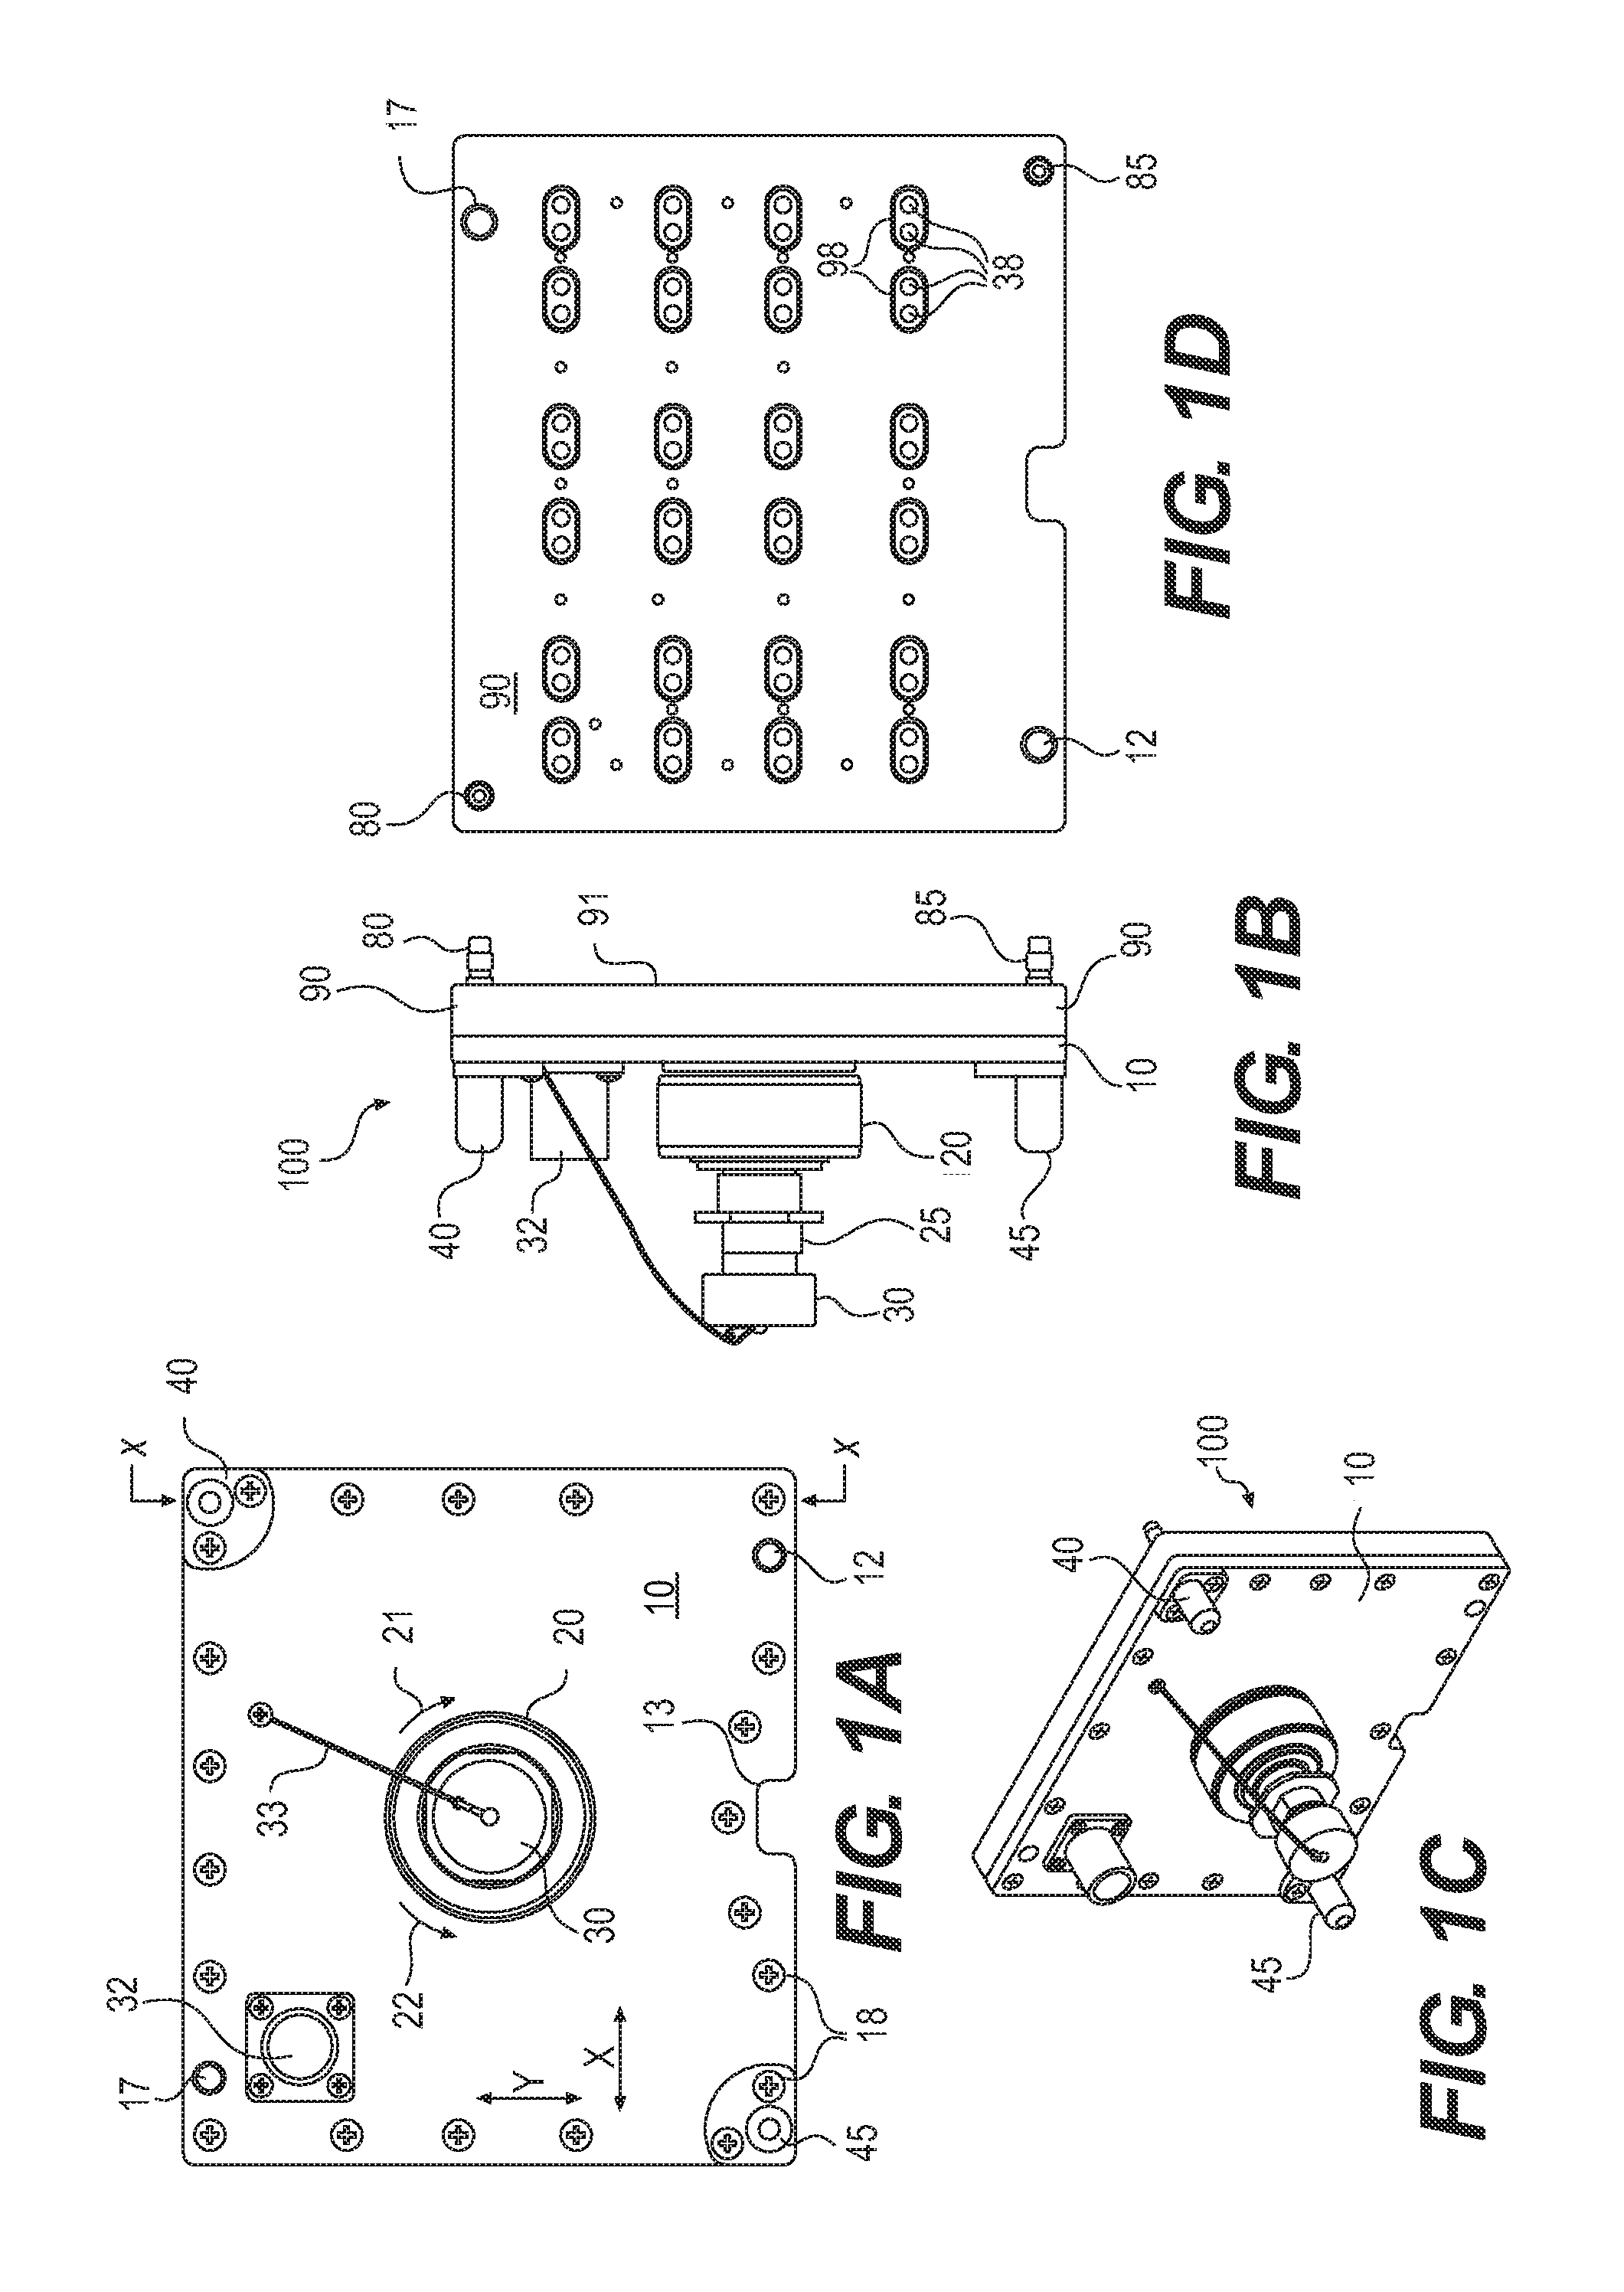 Spring loaded gear bolt assembly and method